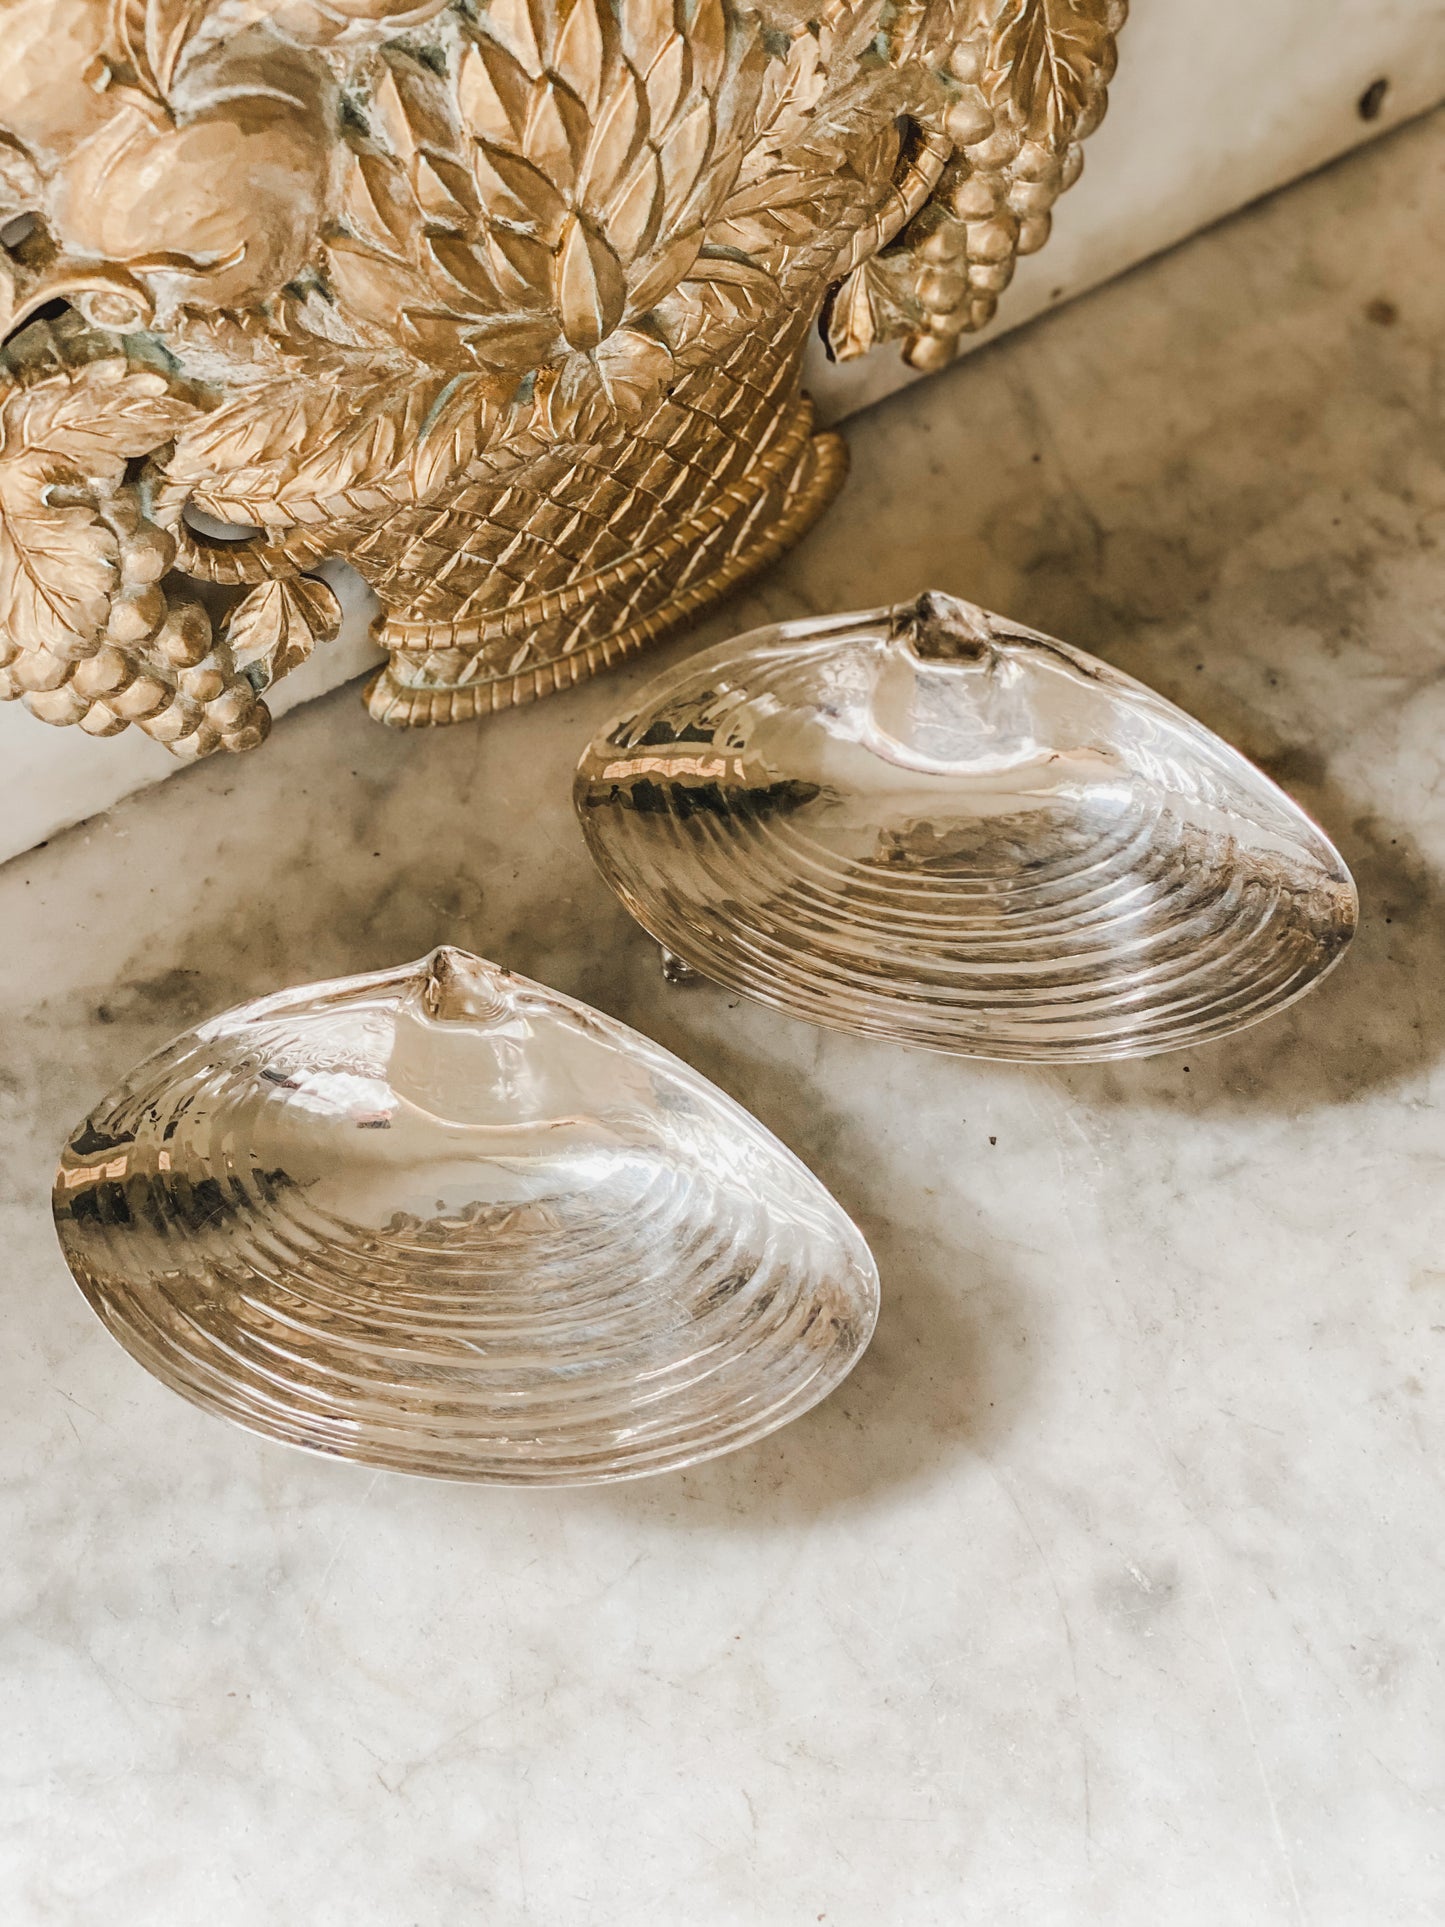 Two Wonderful Antique Silver Clam Shells